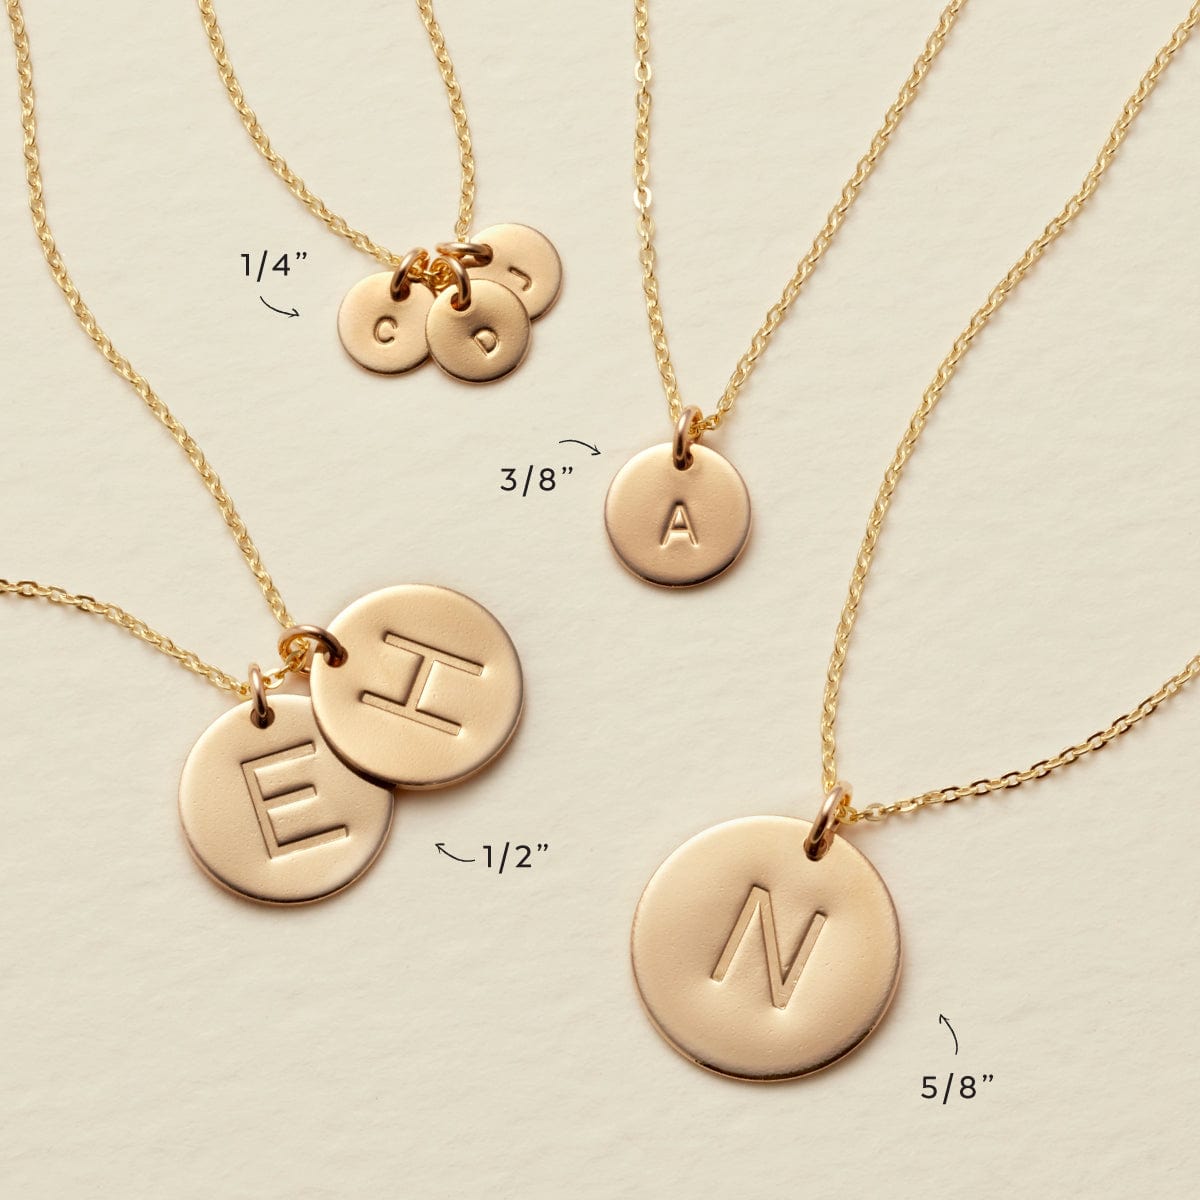 Buy Sterling Silver Initial Necklace, Personalized Necklace, Monogram  Necklace, Hand Stamped Initial Necklace, Small Initial Necklace, NE8010  Online in India - Etsy